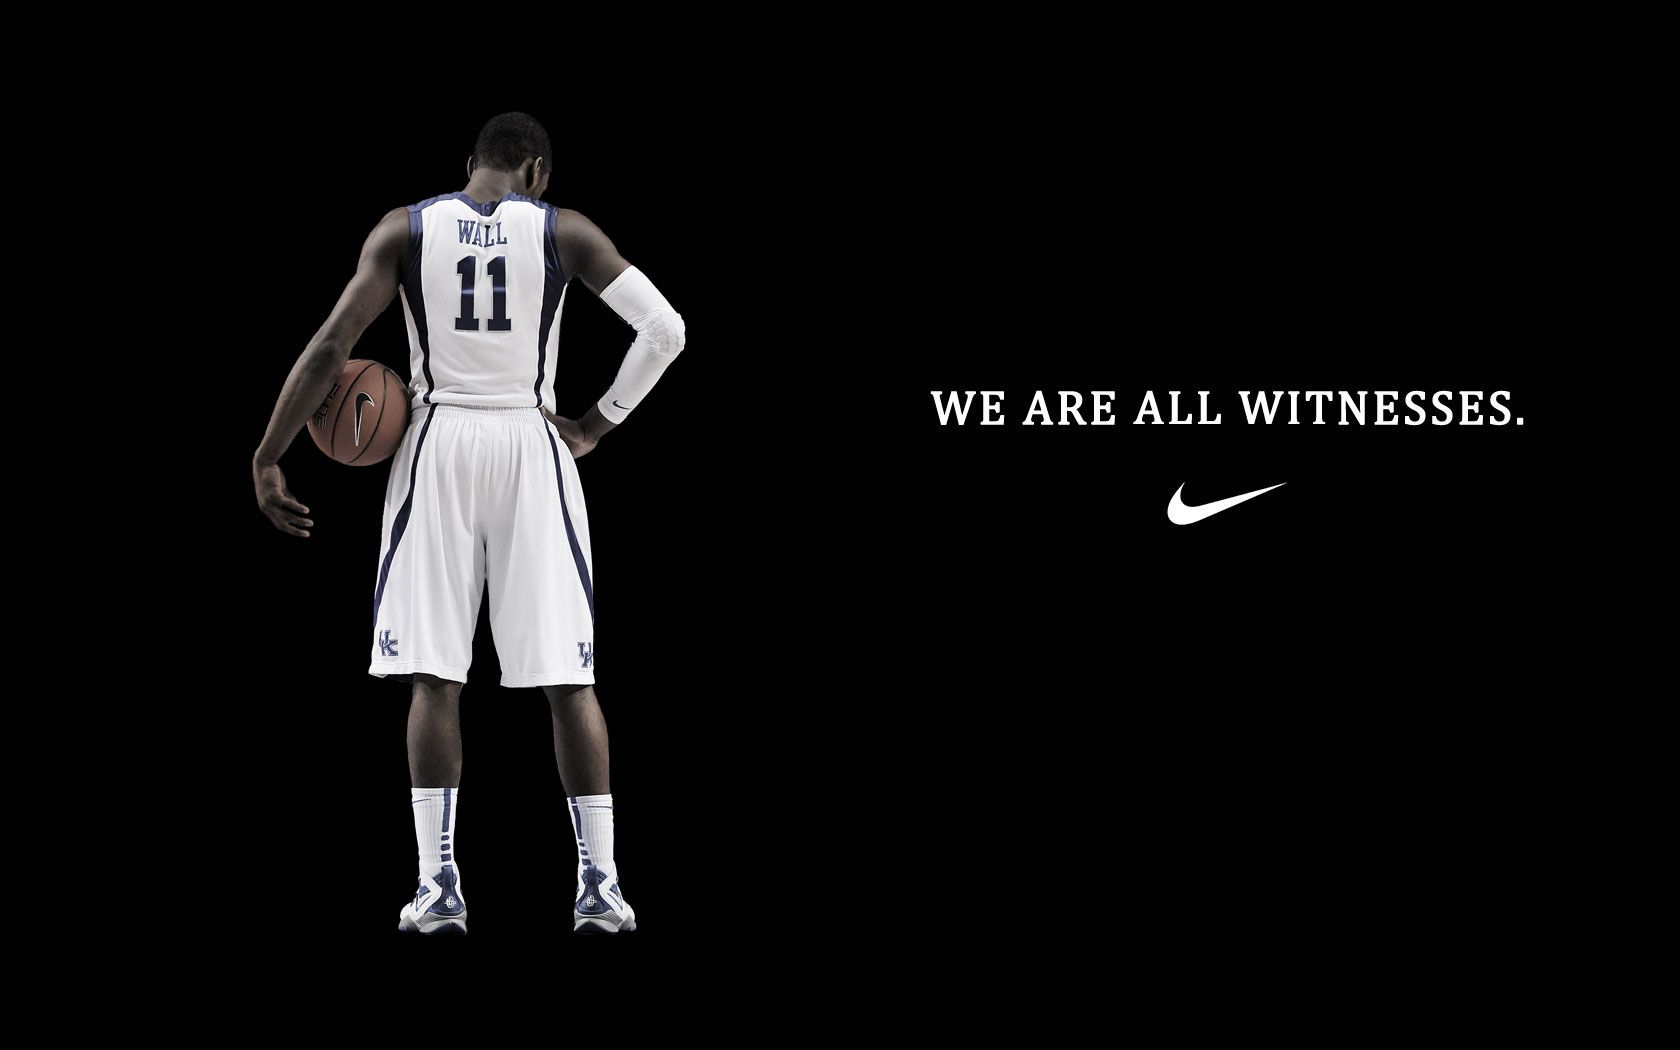 Nike Basketball Quotes Wallpaper Hd - Album on quotesvil.com